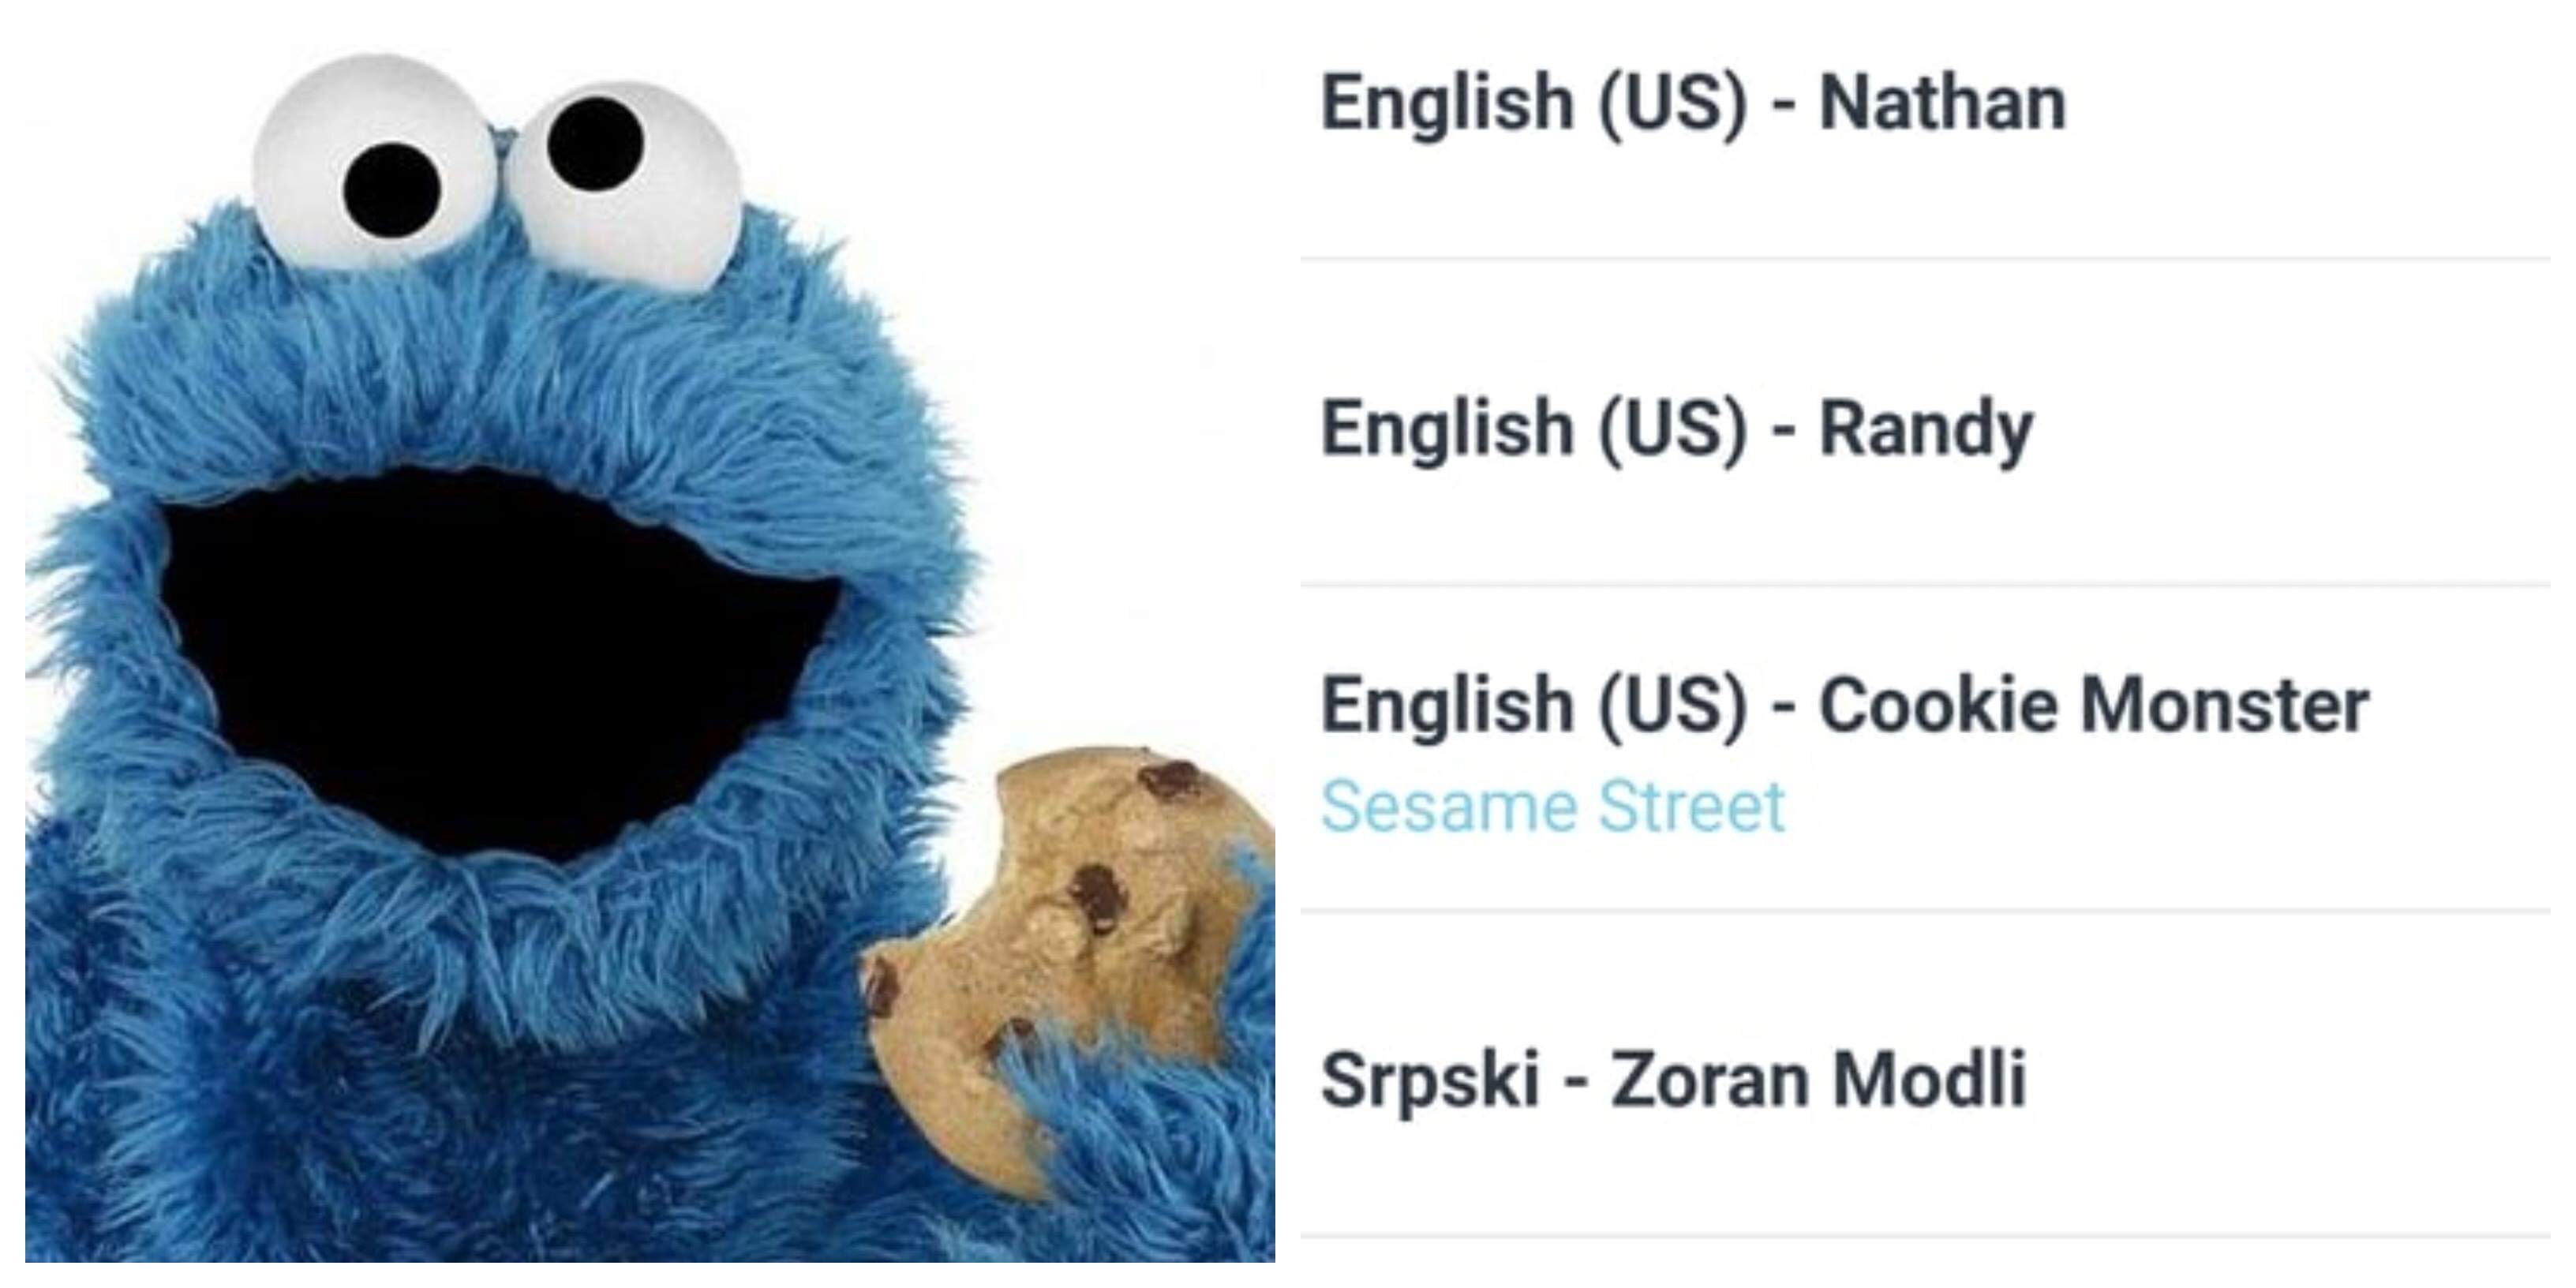 Waze Welcomes Cookie Monster As Limited Time Navigator